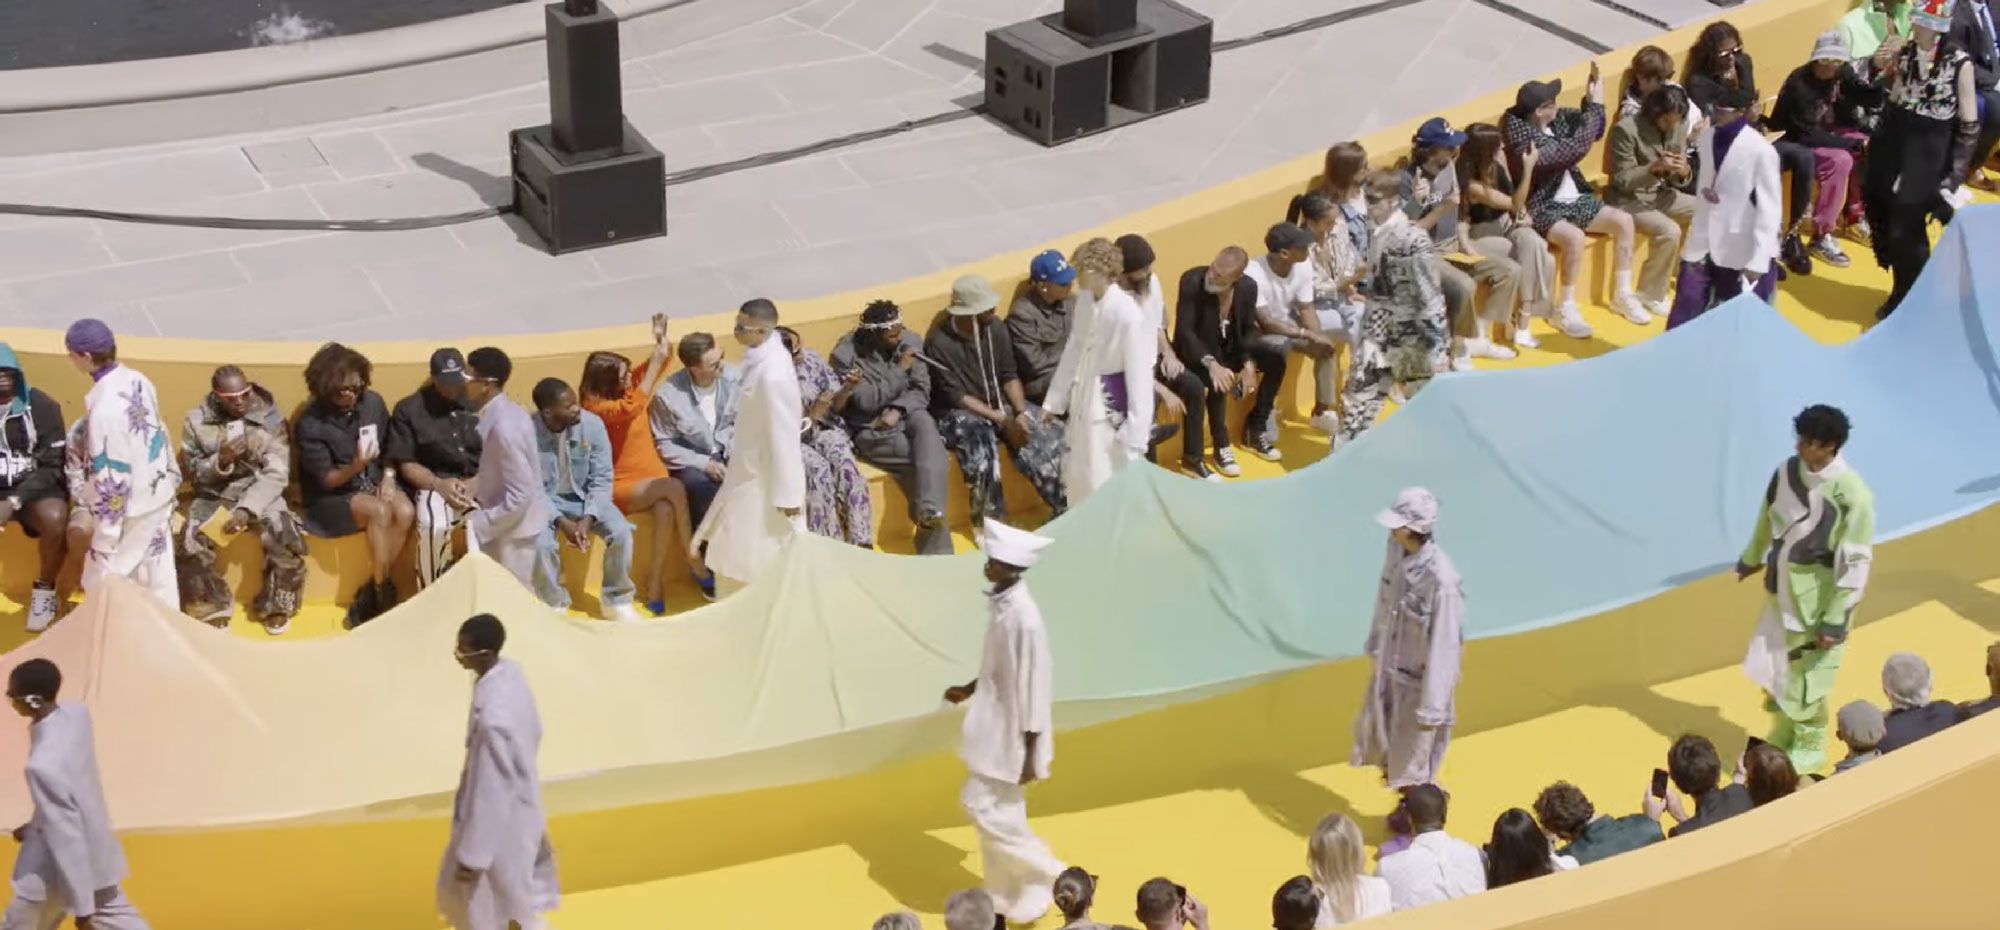 Kendrick Lamar performed at the Louis Vuitton Men's Spring/Summer 2023  collection show in Paris Long Live Virgil 🕊💛